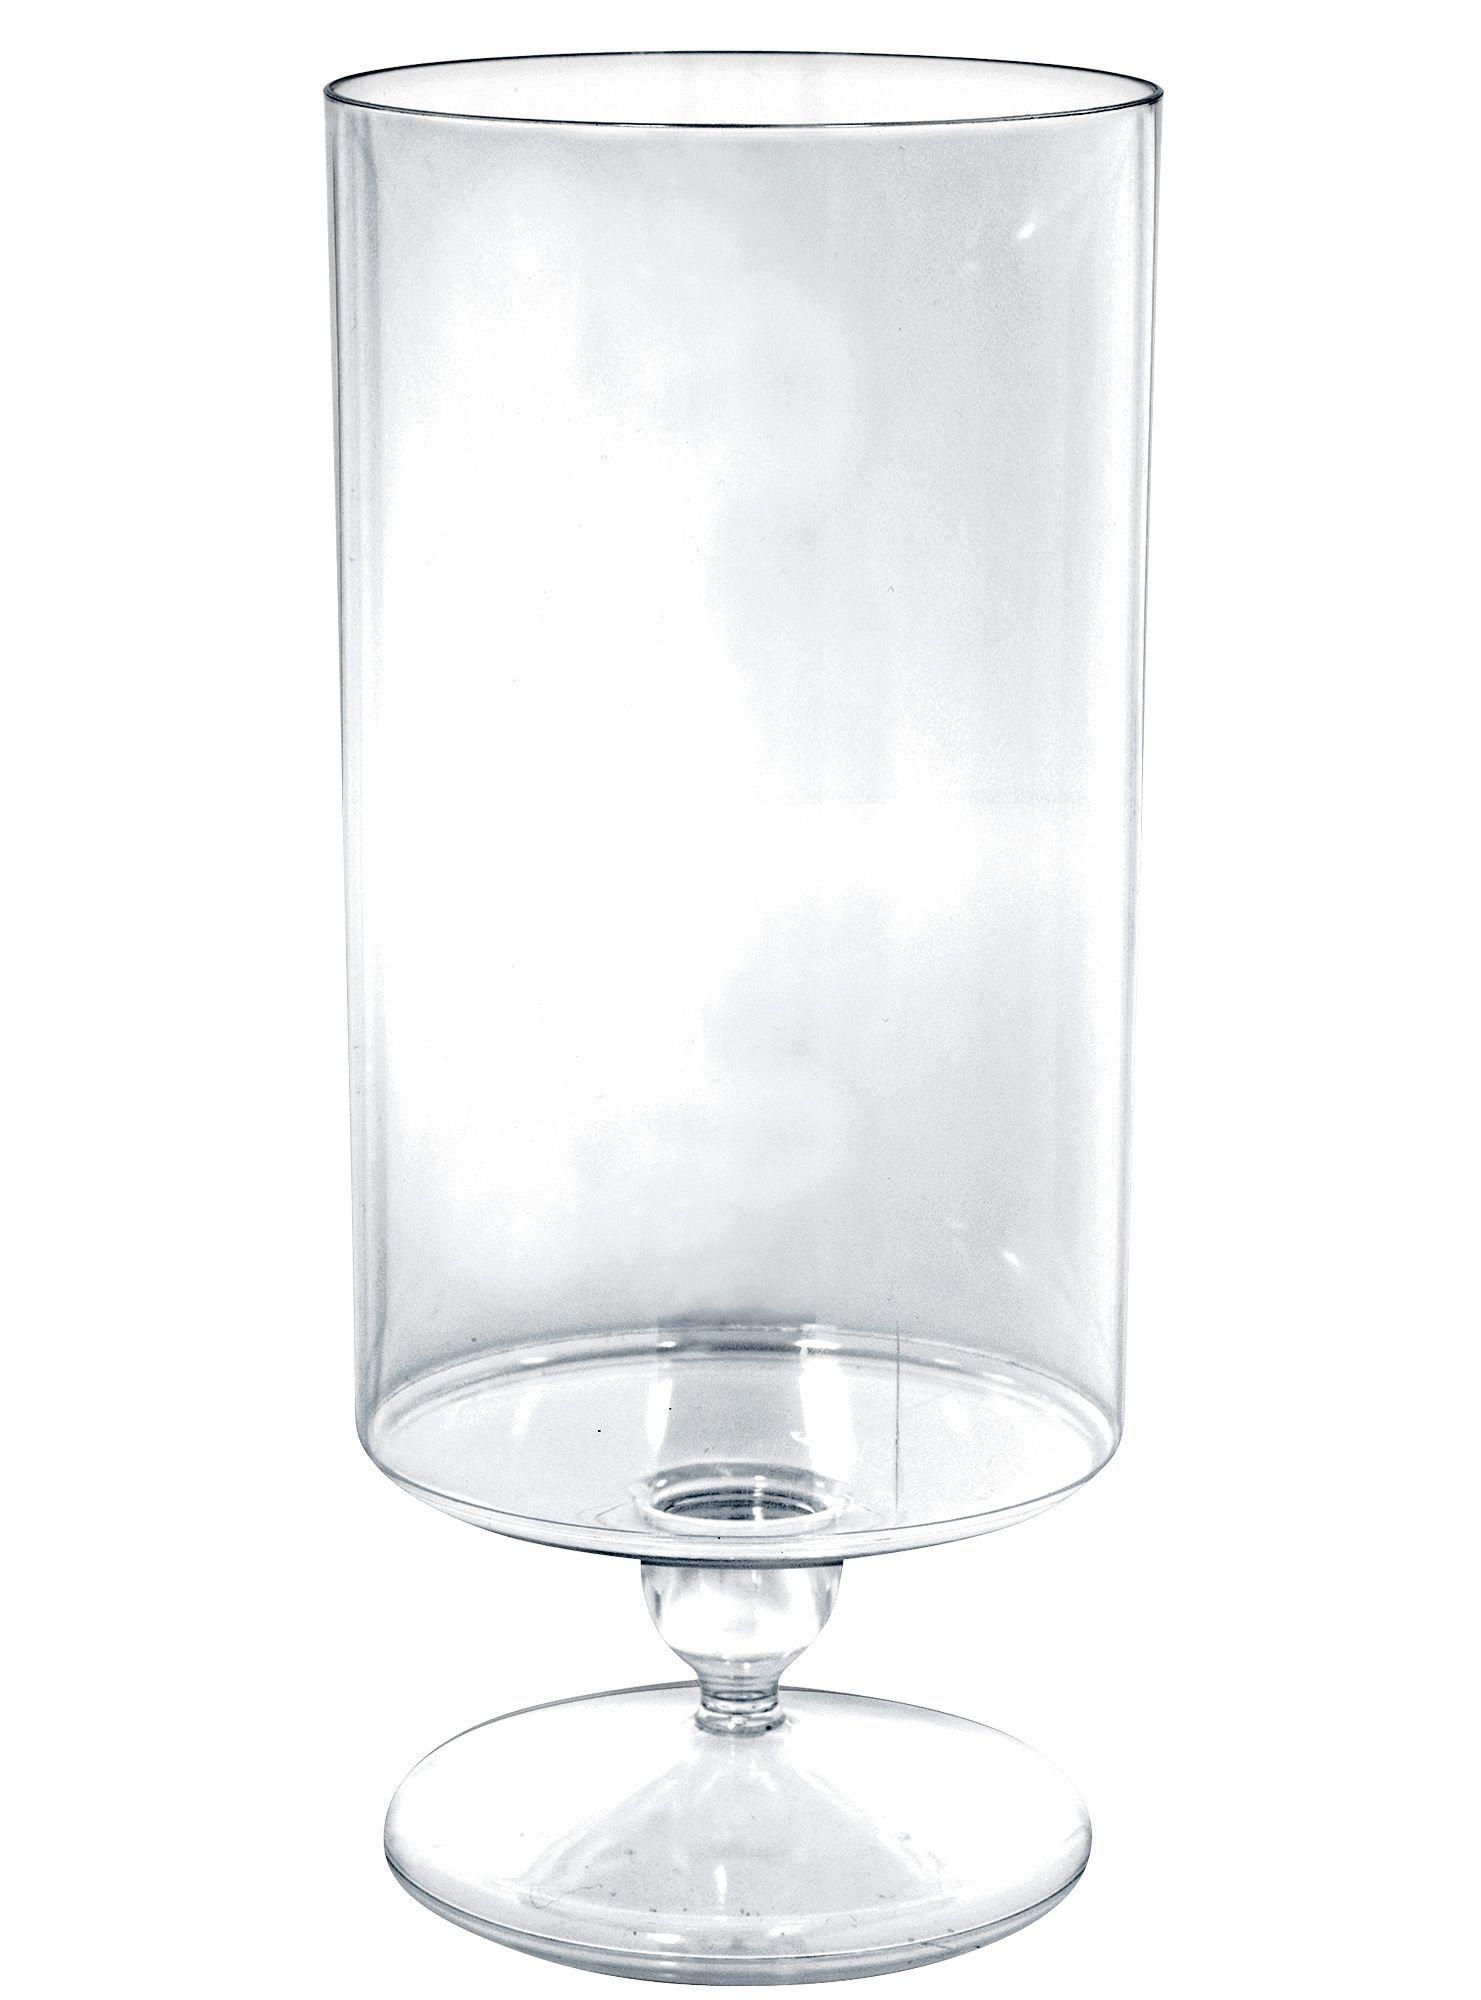 Amscan Clear Plastic Cylindrical Candy Container, L